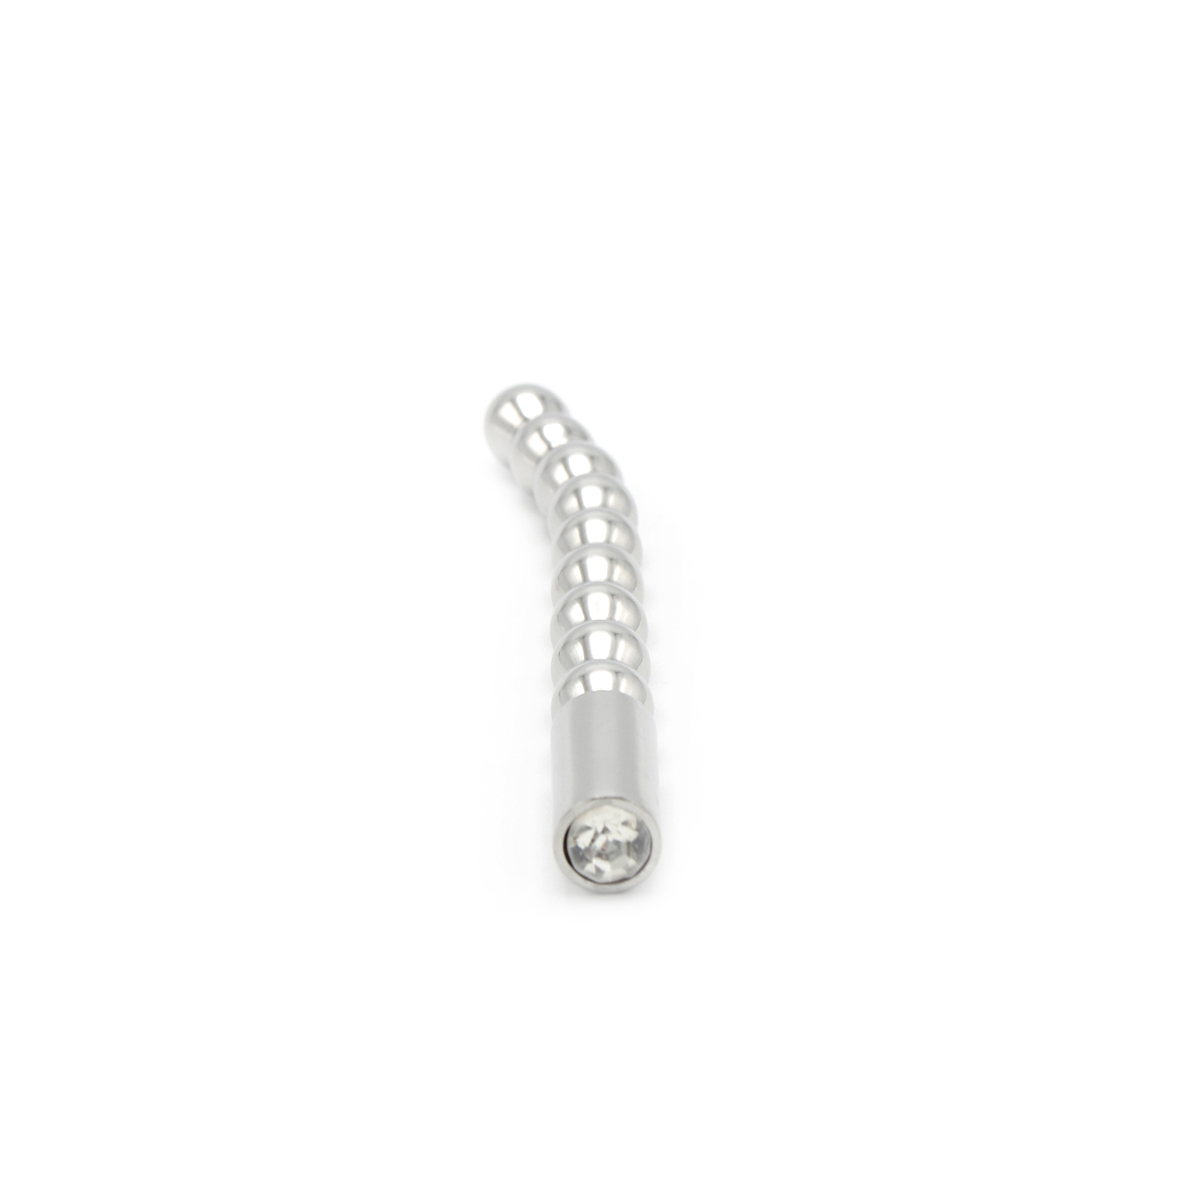 Solid-Penis-Plug-Beaded-Curved-8-mm-OPR-2960102-4